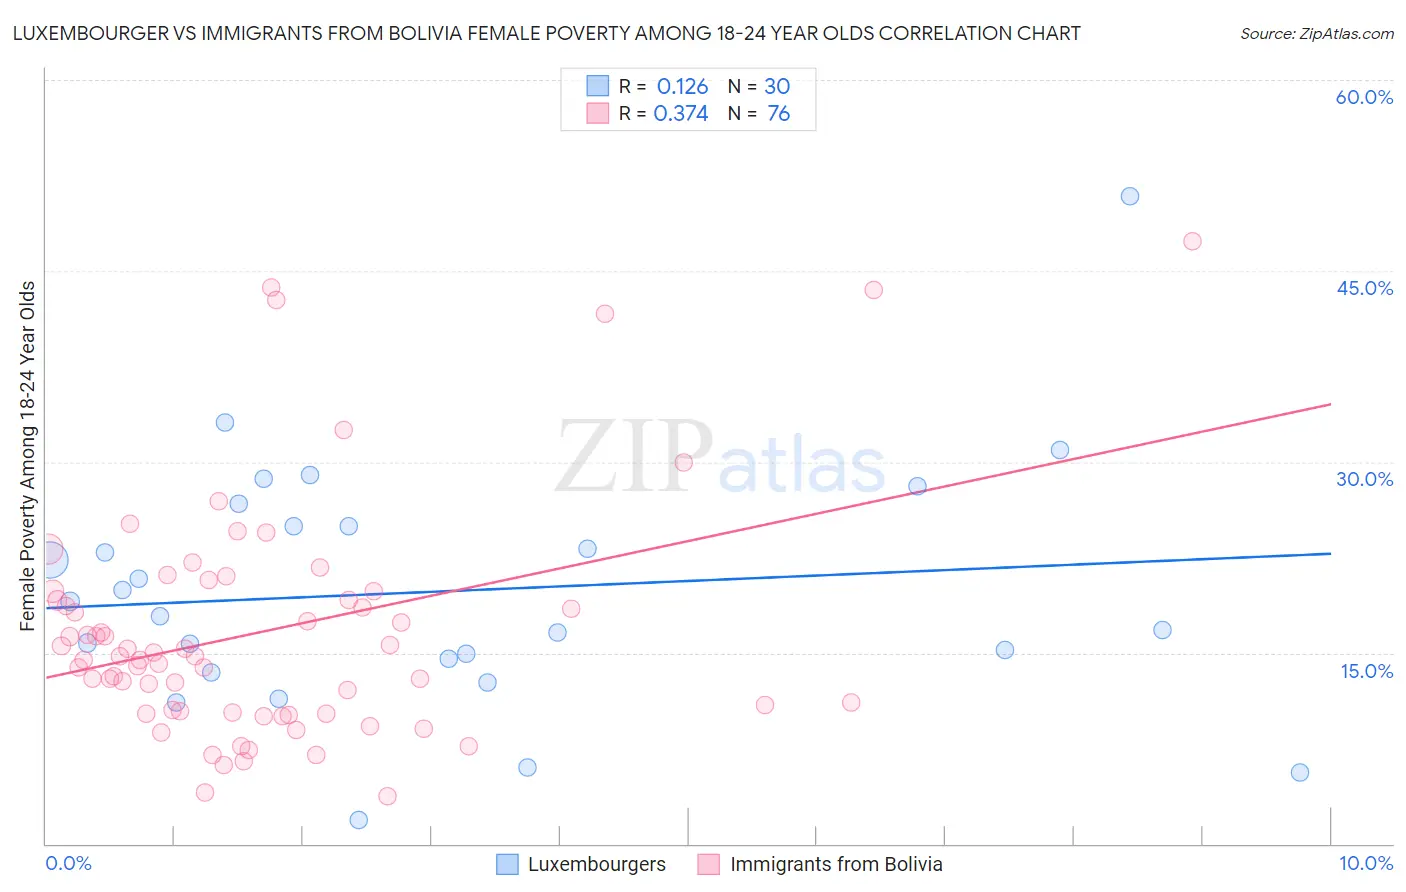 Luxembourger vs Immigrants from Bolivia Female Poverty Among 18-24 Year Olds